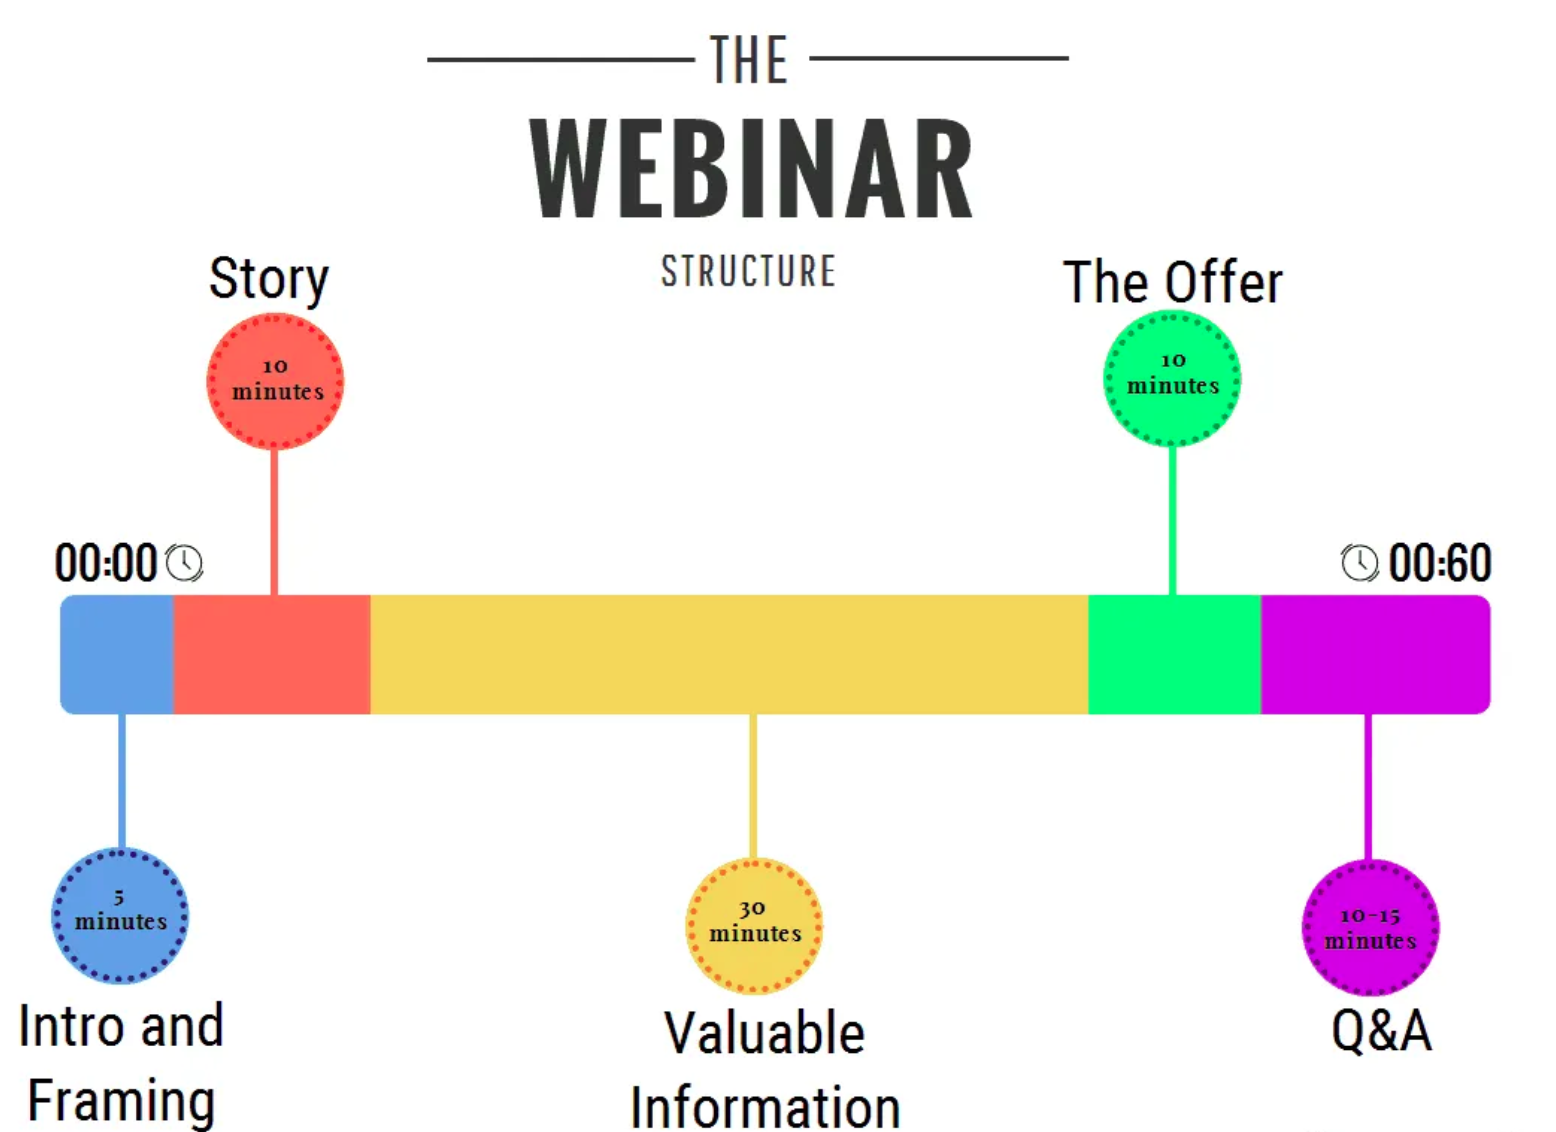 Step-by-Step Guide to Conducting the Actual Webinar